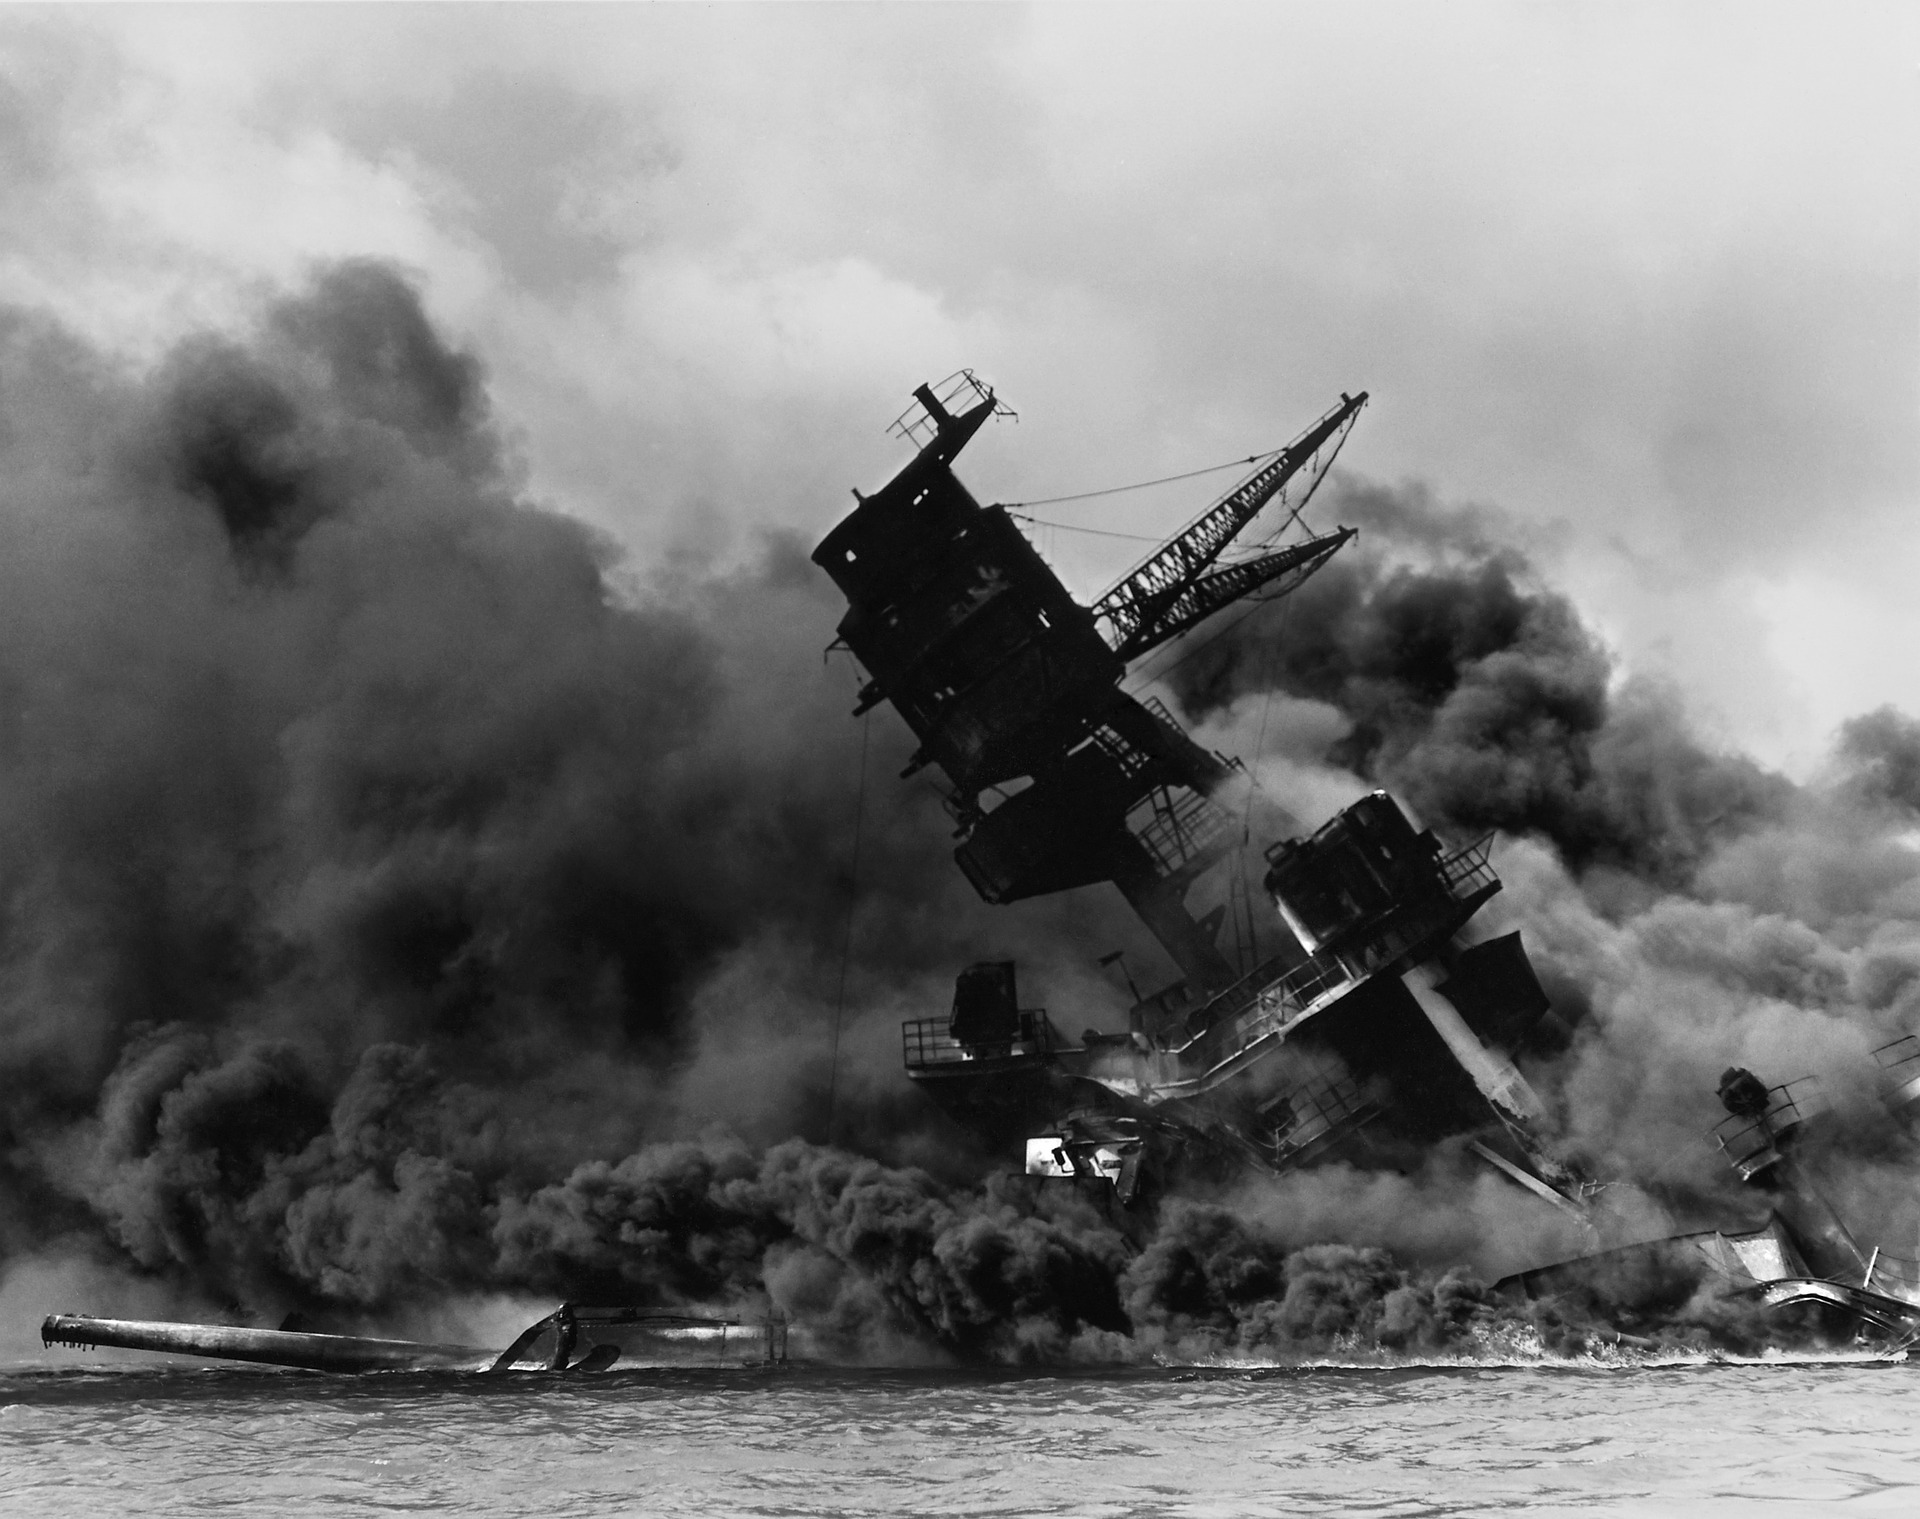 Shinzo Abe, Pearl Harbor 75 years after